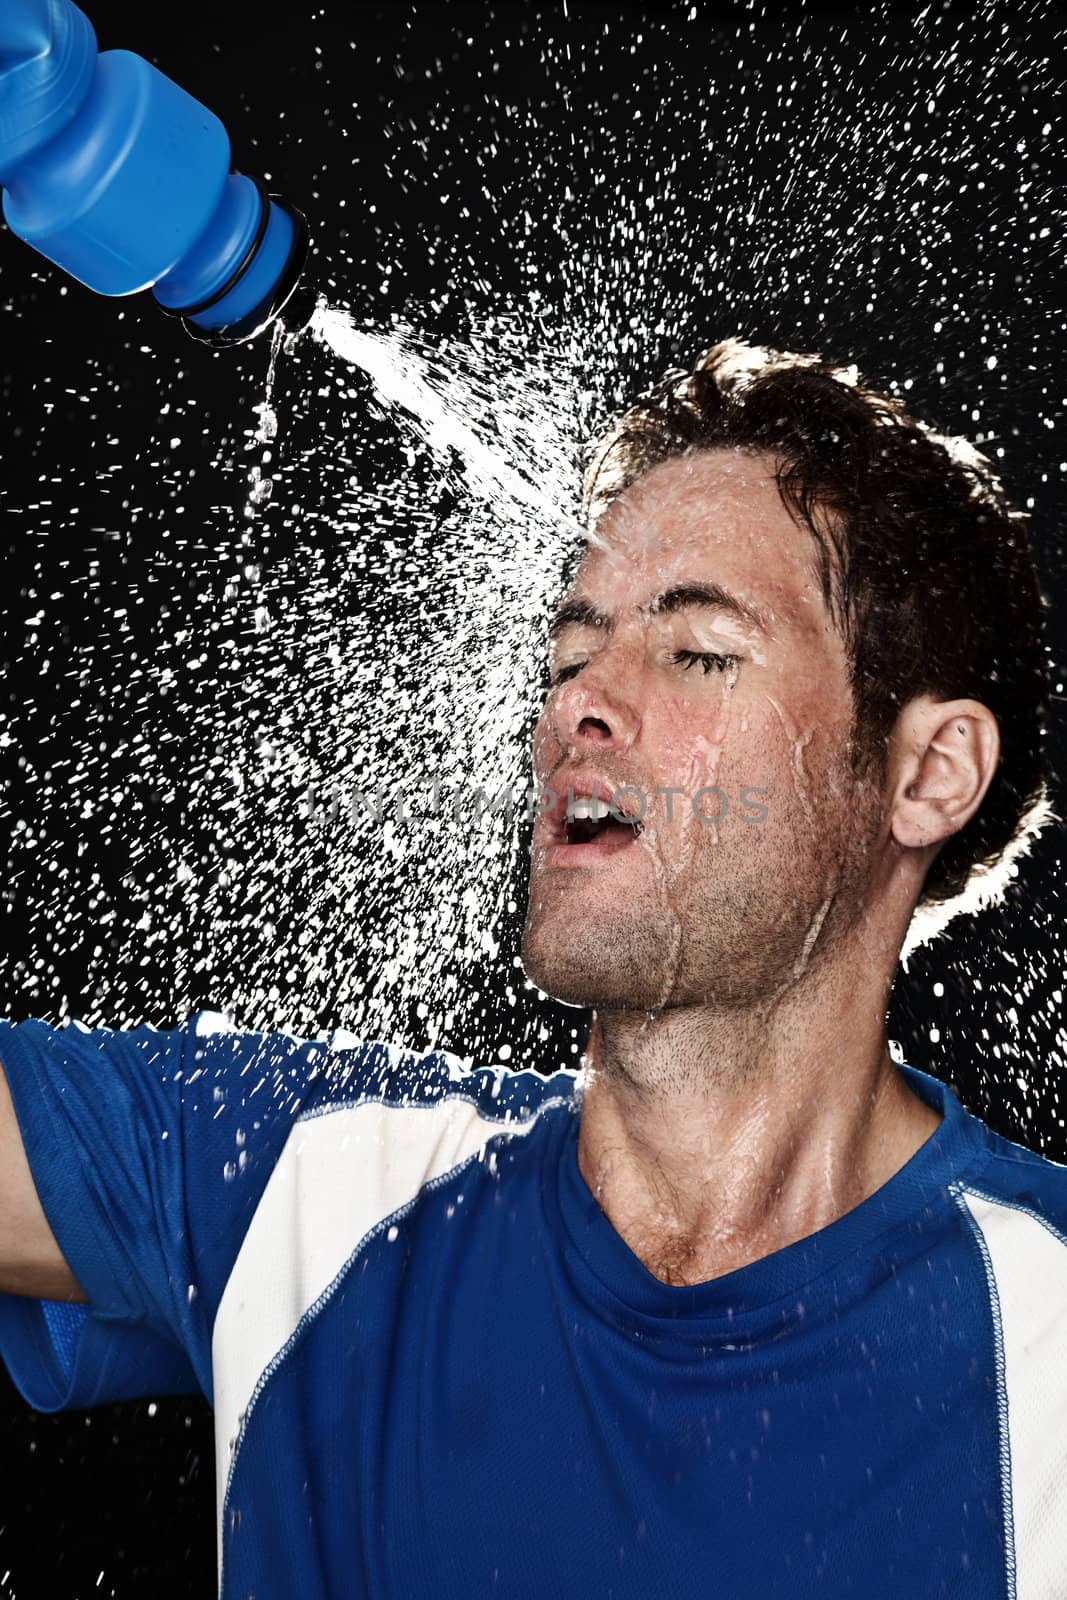 Sport fitness man. Studio shot of a young athletic man cooling himself after training by squirting water over himself from a drinks bottle